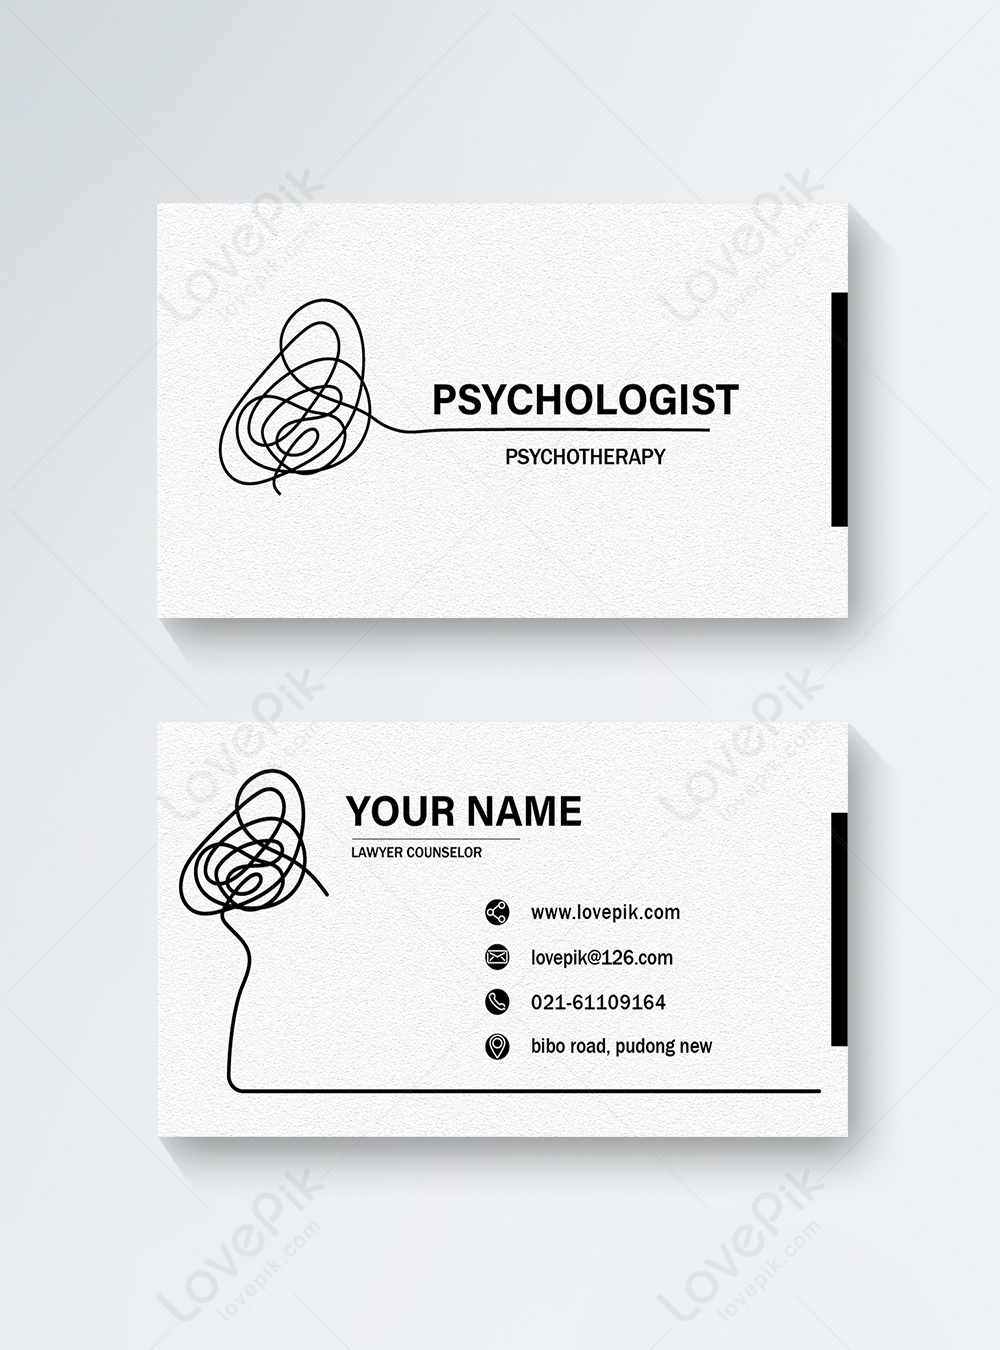 Psychologist business card template image_picture free download Regarding Legal Business Cards Templates Free